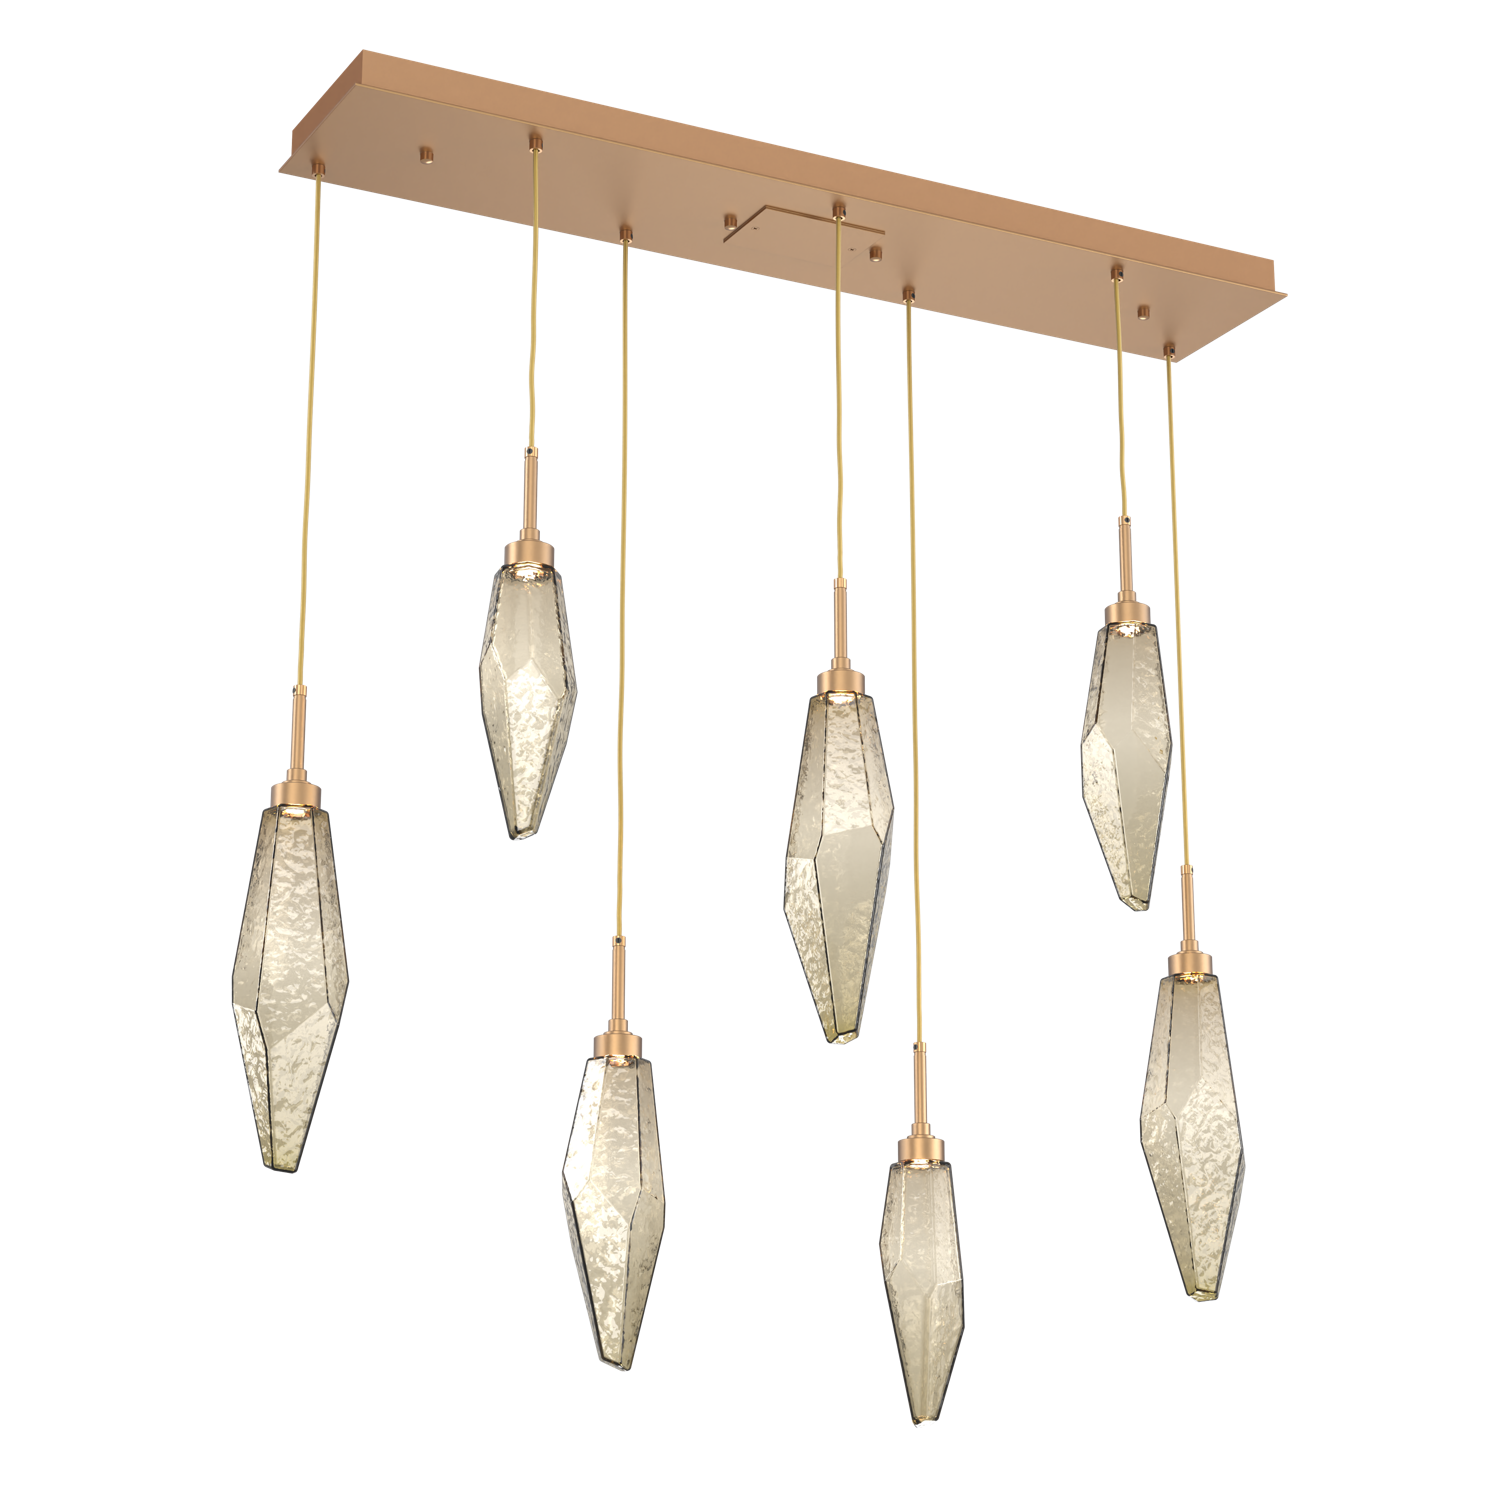 PLB0050-07-NB-CB-Hammerton-Studio-Rock-Crystal-7-light-linear-pendant-chandelier-with-novel-brass-finish-and-chilled-bronze-blown-glass-shades-and-LED-lamping